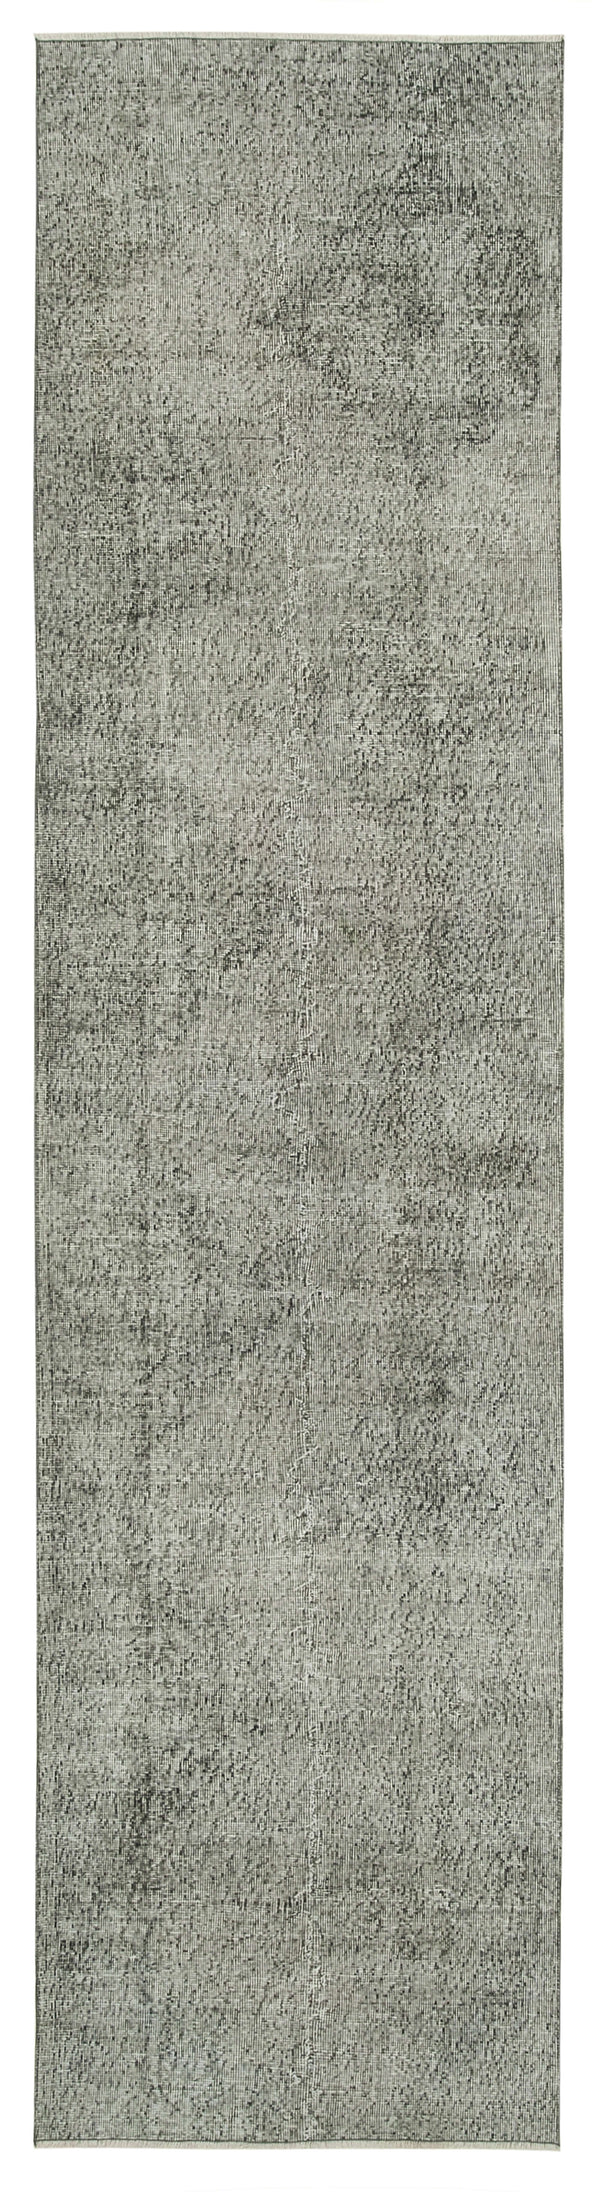 Handmade Overdyed Runner > Design# OL-AC-38165 > Size: 3'-0" x 11'-10", Carpet Culture Rugs, Handmade Rugs, NYC Rugs, New Rugs, Shop Rugs, Rug Store, Outlet Rugs, SoHo Rugs, Rugs in USA